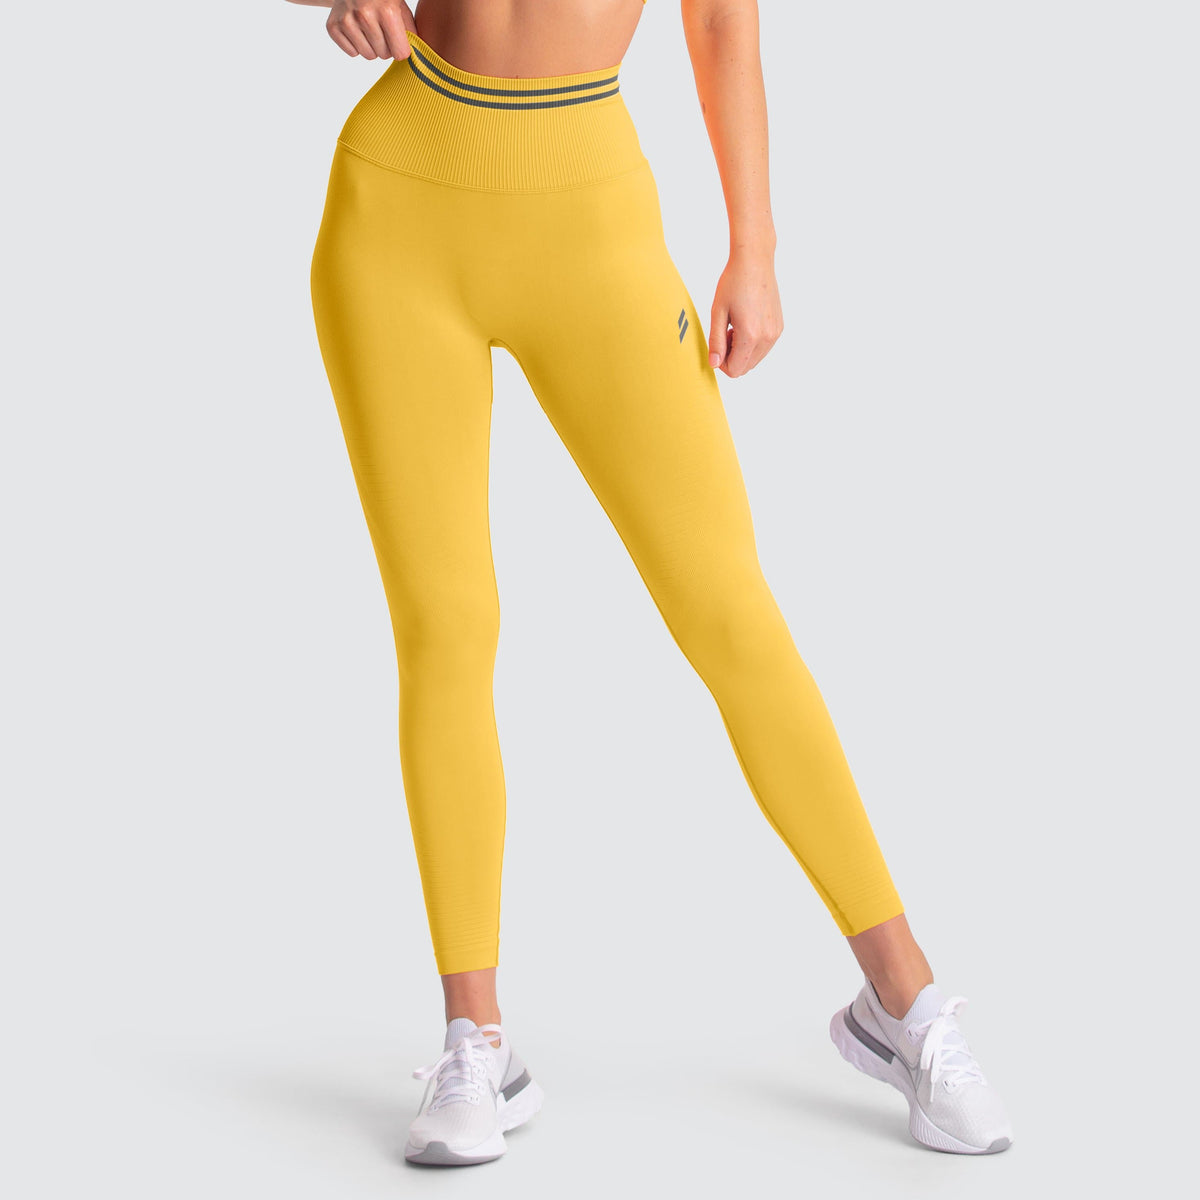 Ribbed High Waisted Seamless Scrunch Bum Leggings in Mustard with